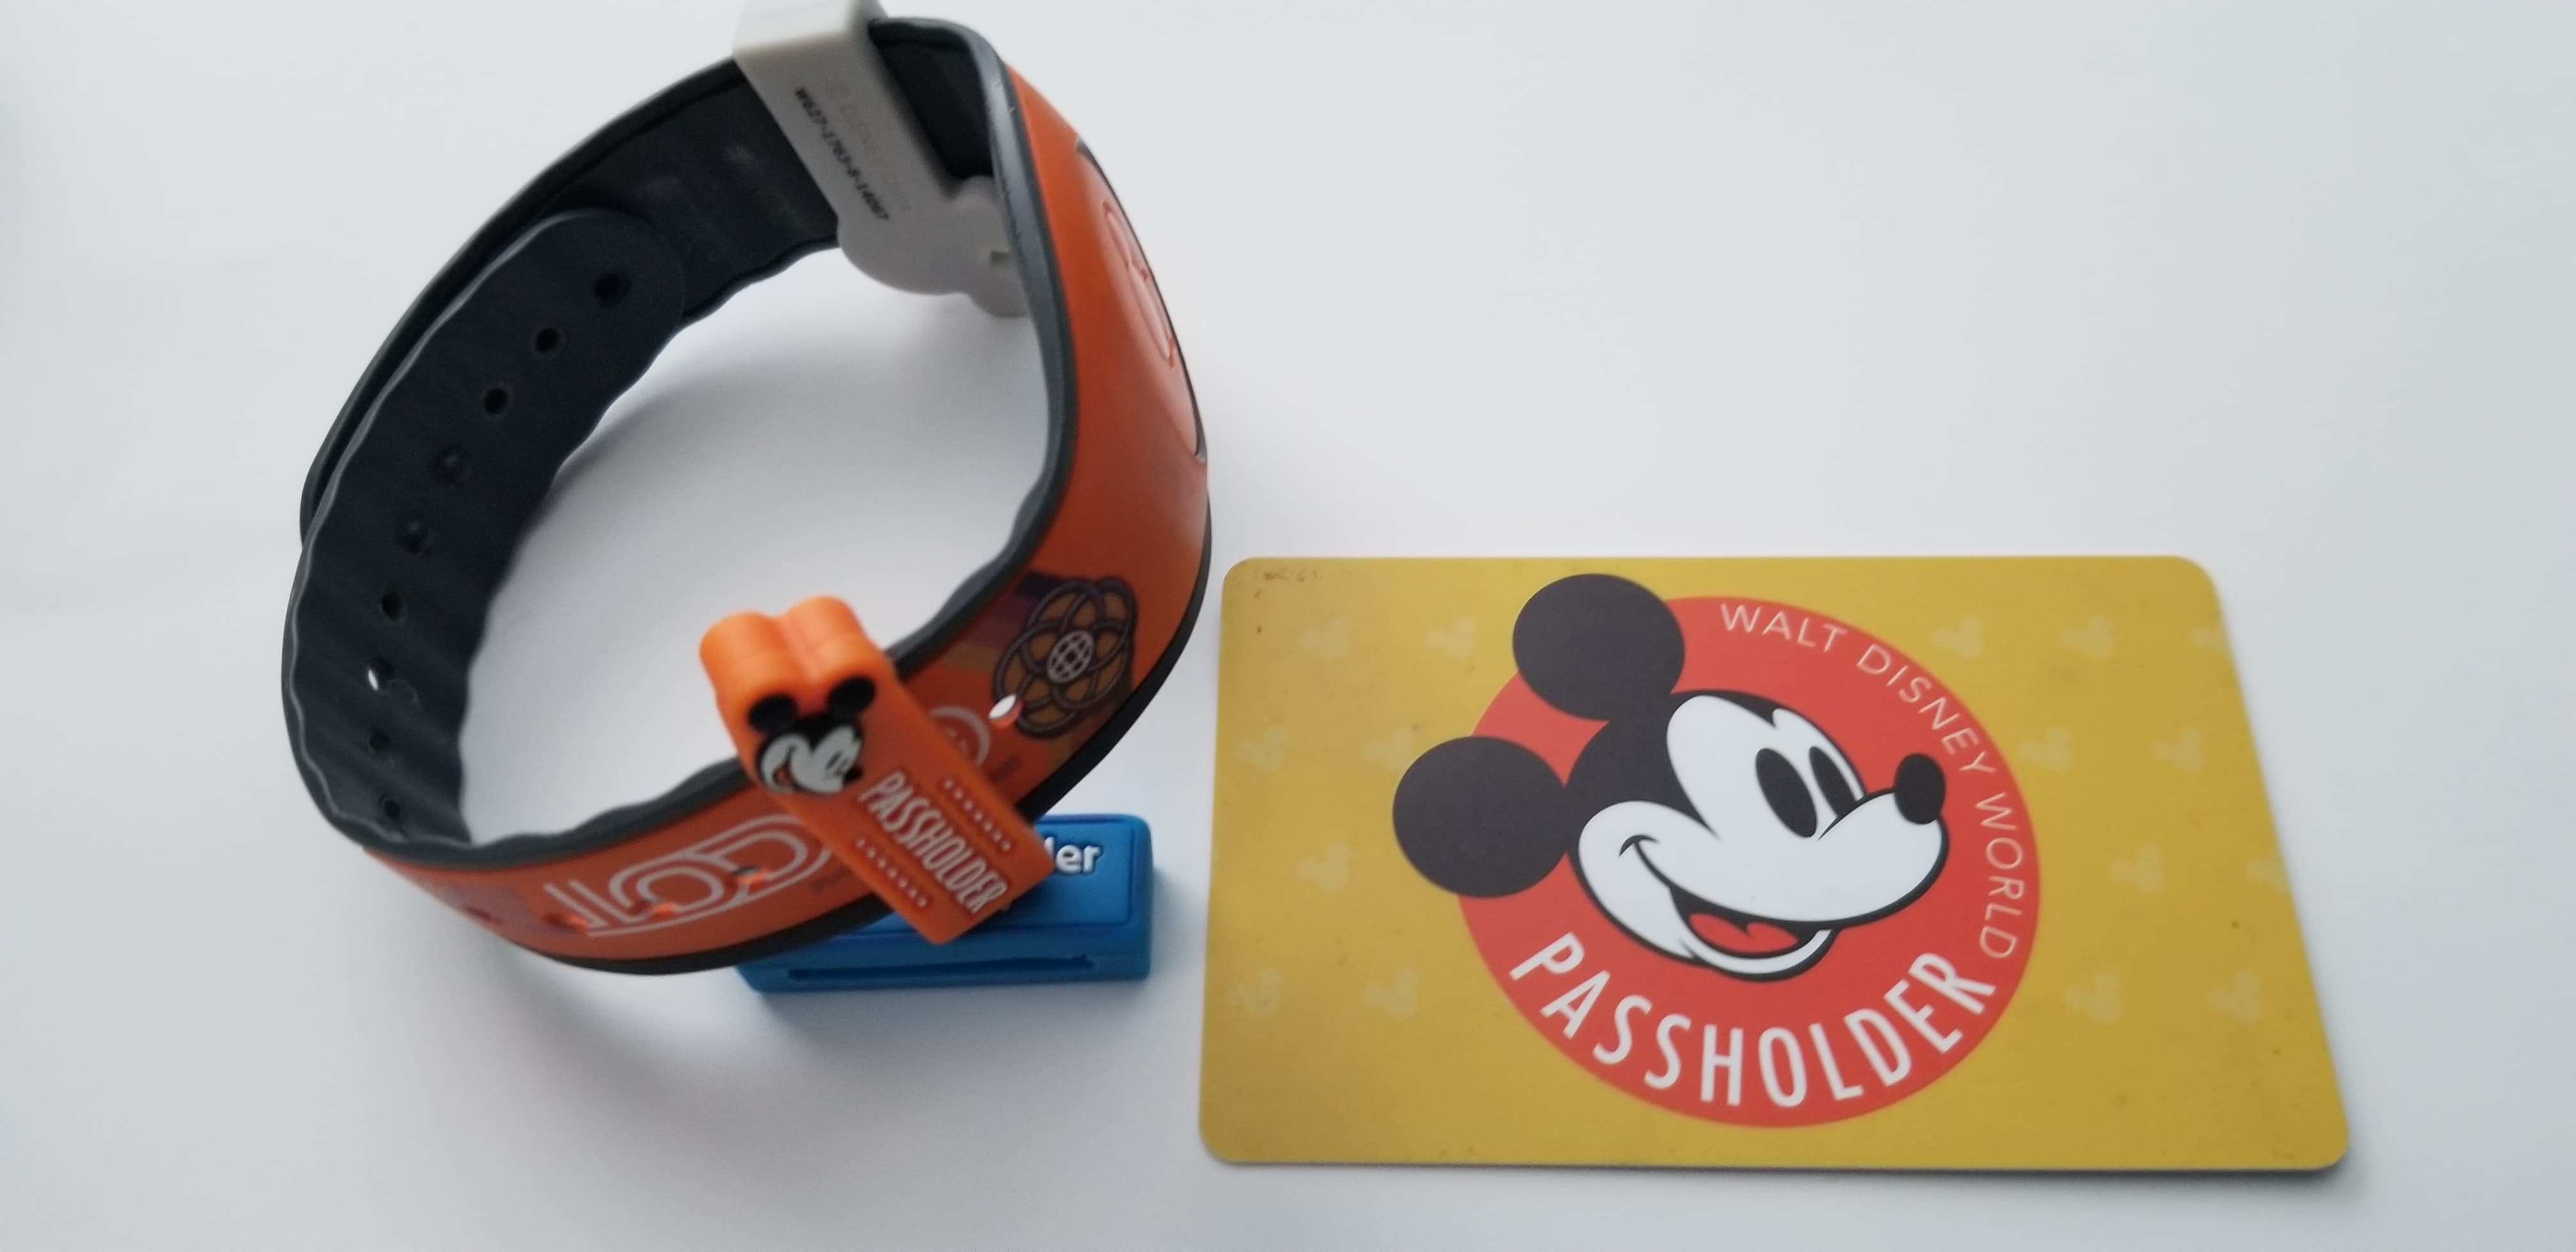 Bring a Friend is Back for Walt Disney World Annual Passholders